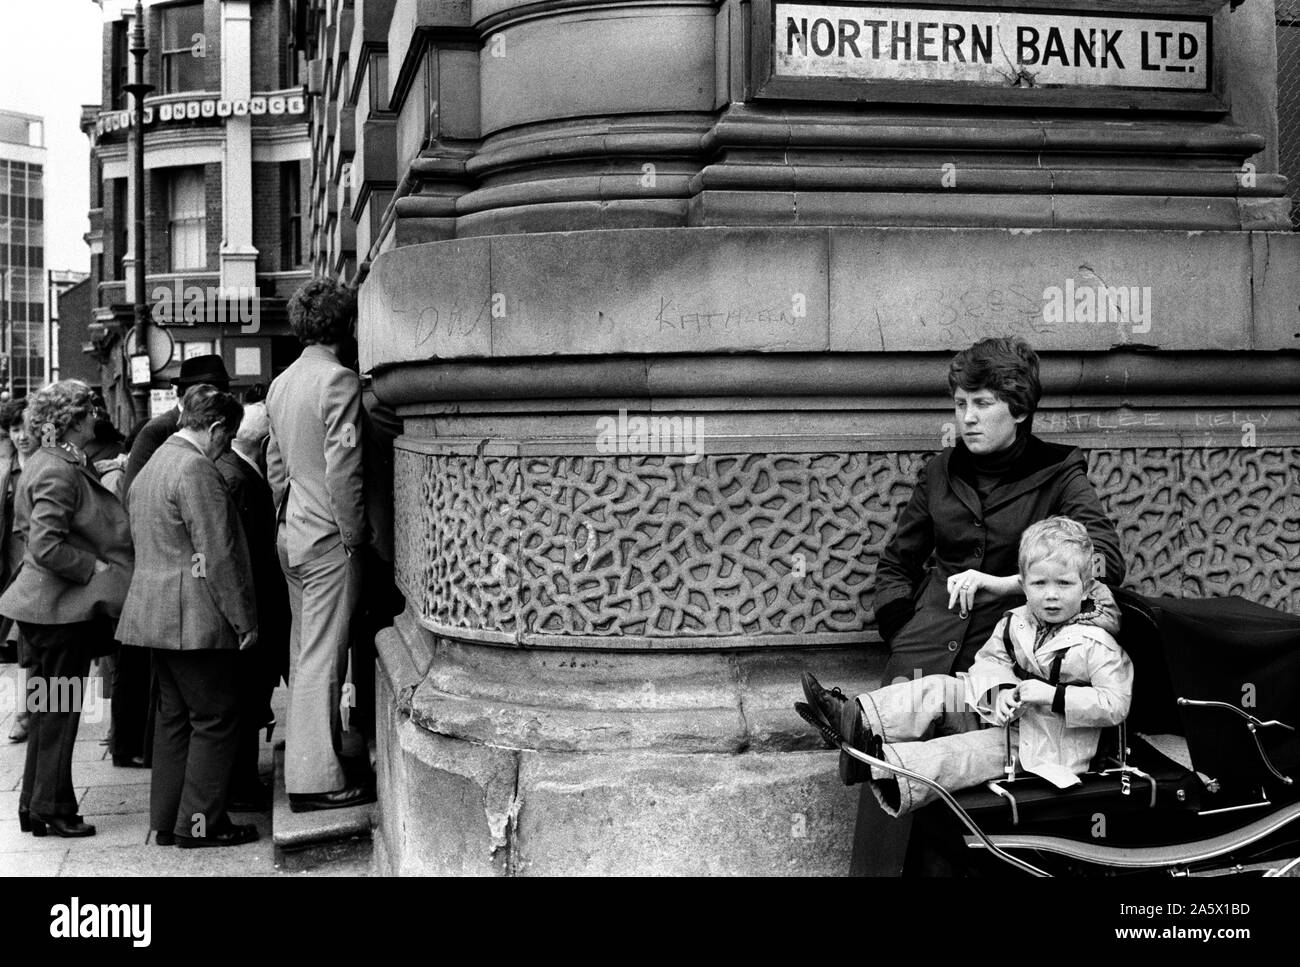 Derry, The Northern Bank Ltd. The Troubles 1970s lunch time customers trying to get it the bank, for security reasons only a few are allowed in at a time 1979. HOMER SYKES Stock Photo